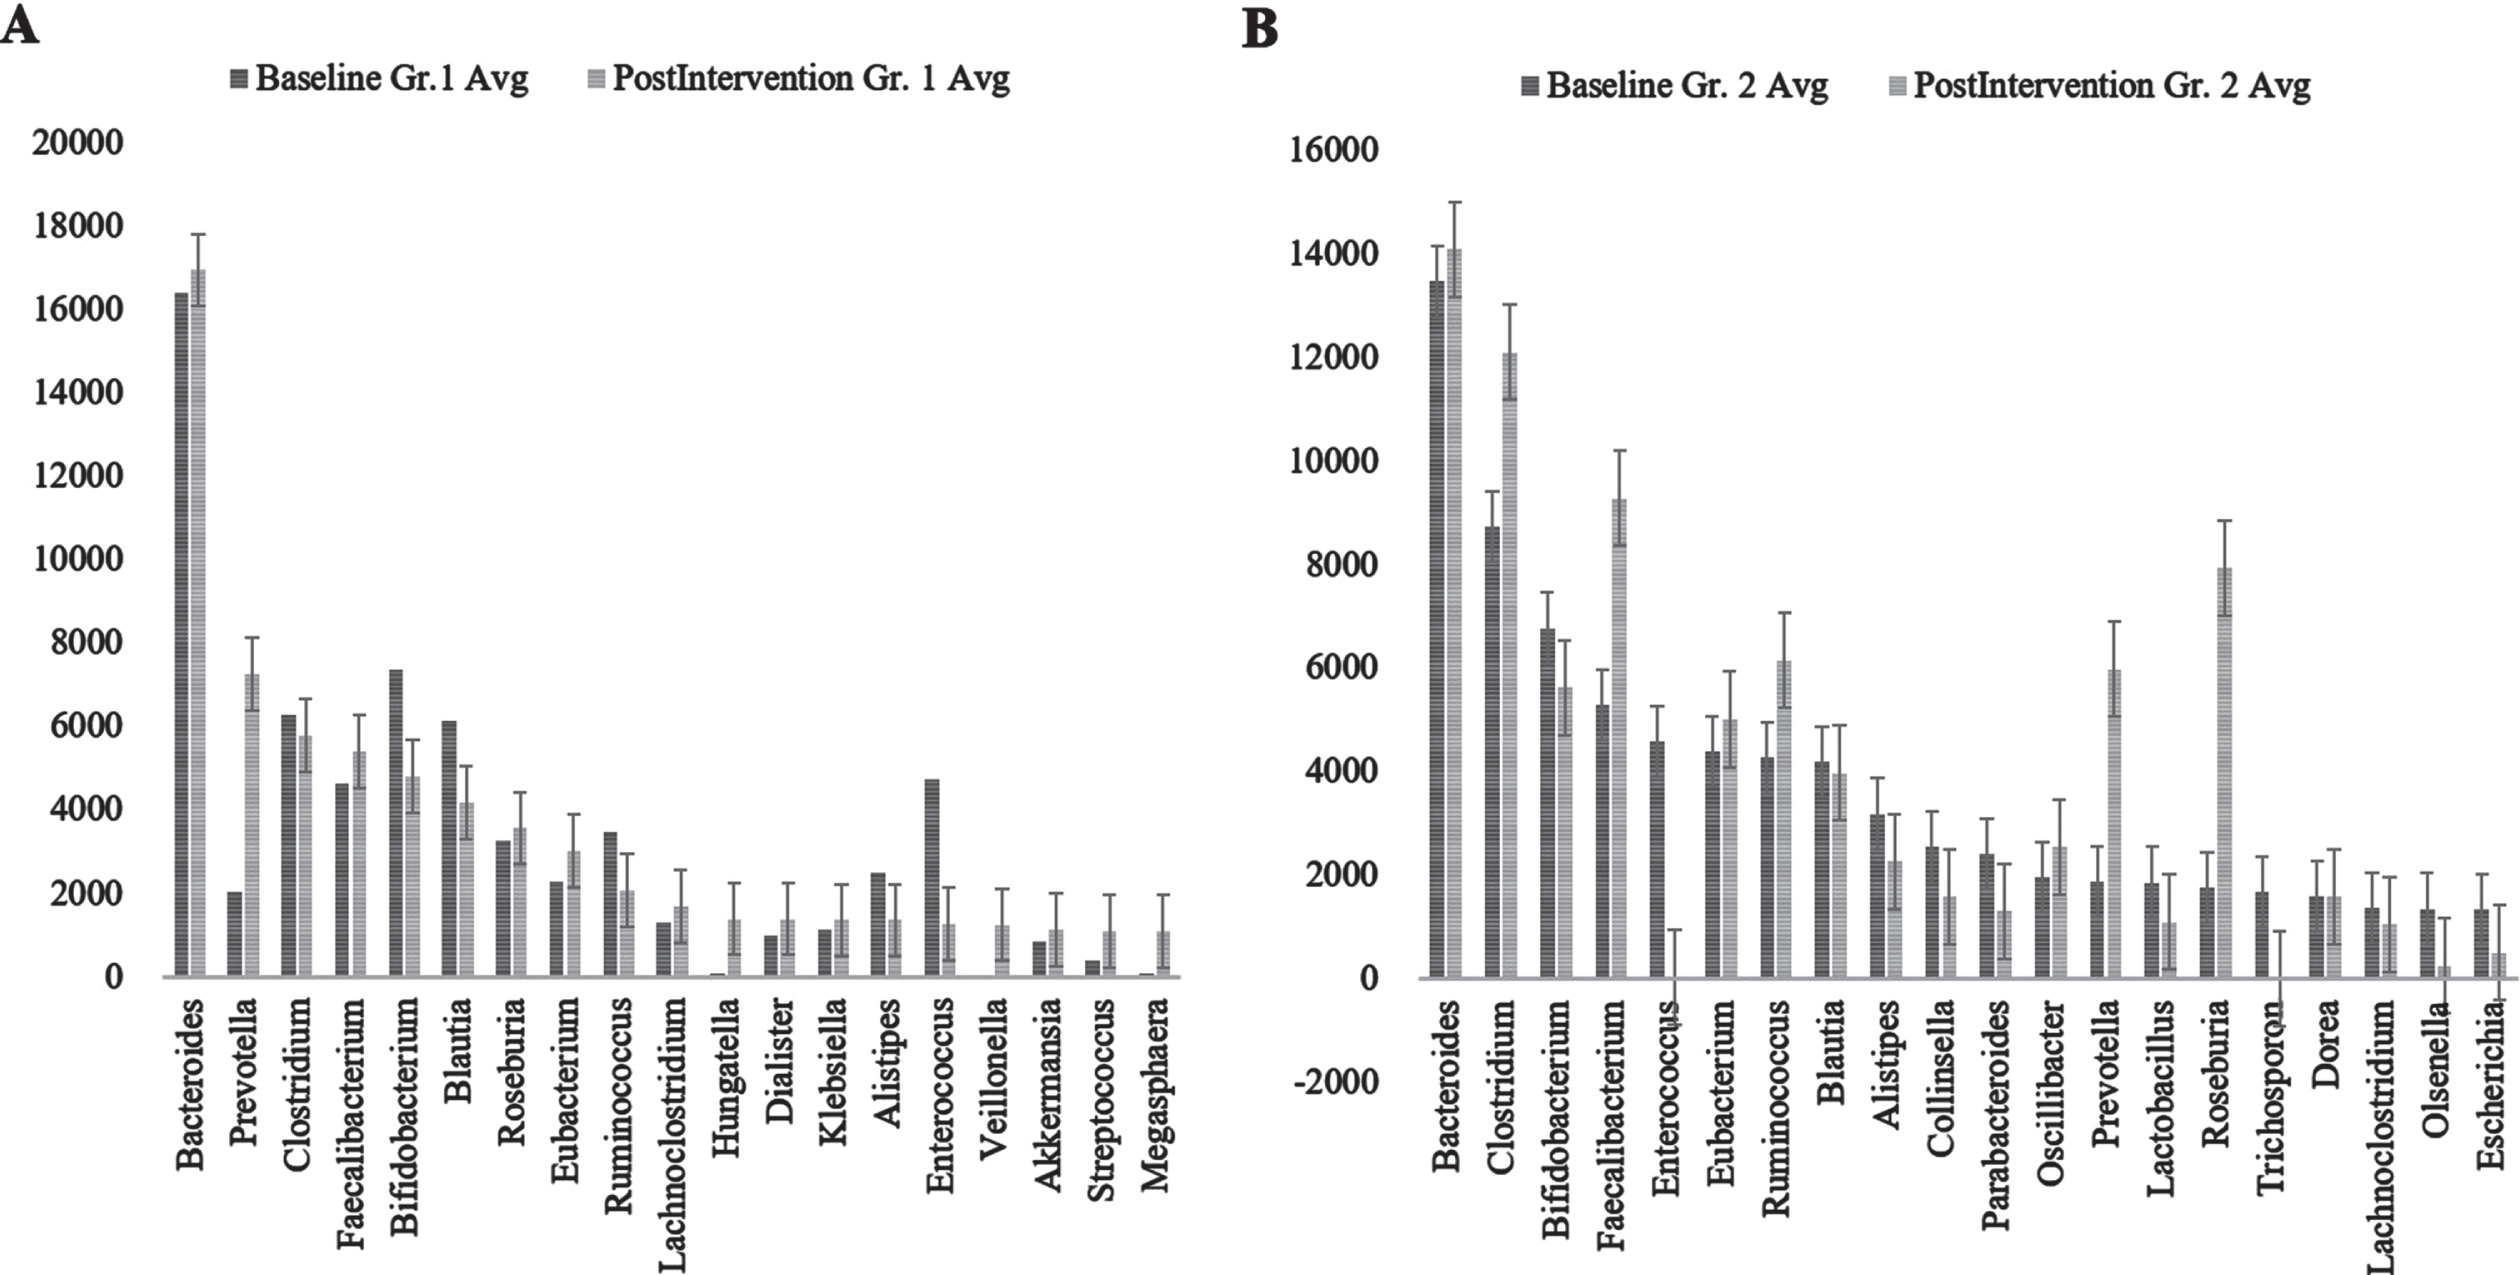 Genus abundance of major genera identified (A) Group (Gr.) 1 at baseline versus postintervention and (B) Group (Gr.) 2 at baseline versus postintervention. Phylum Firmicutes was the most abundant followed by Bacteroidetes.